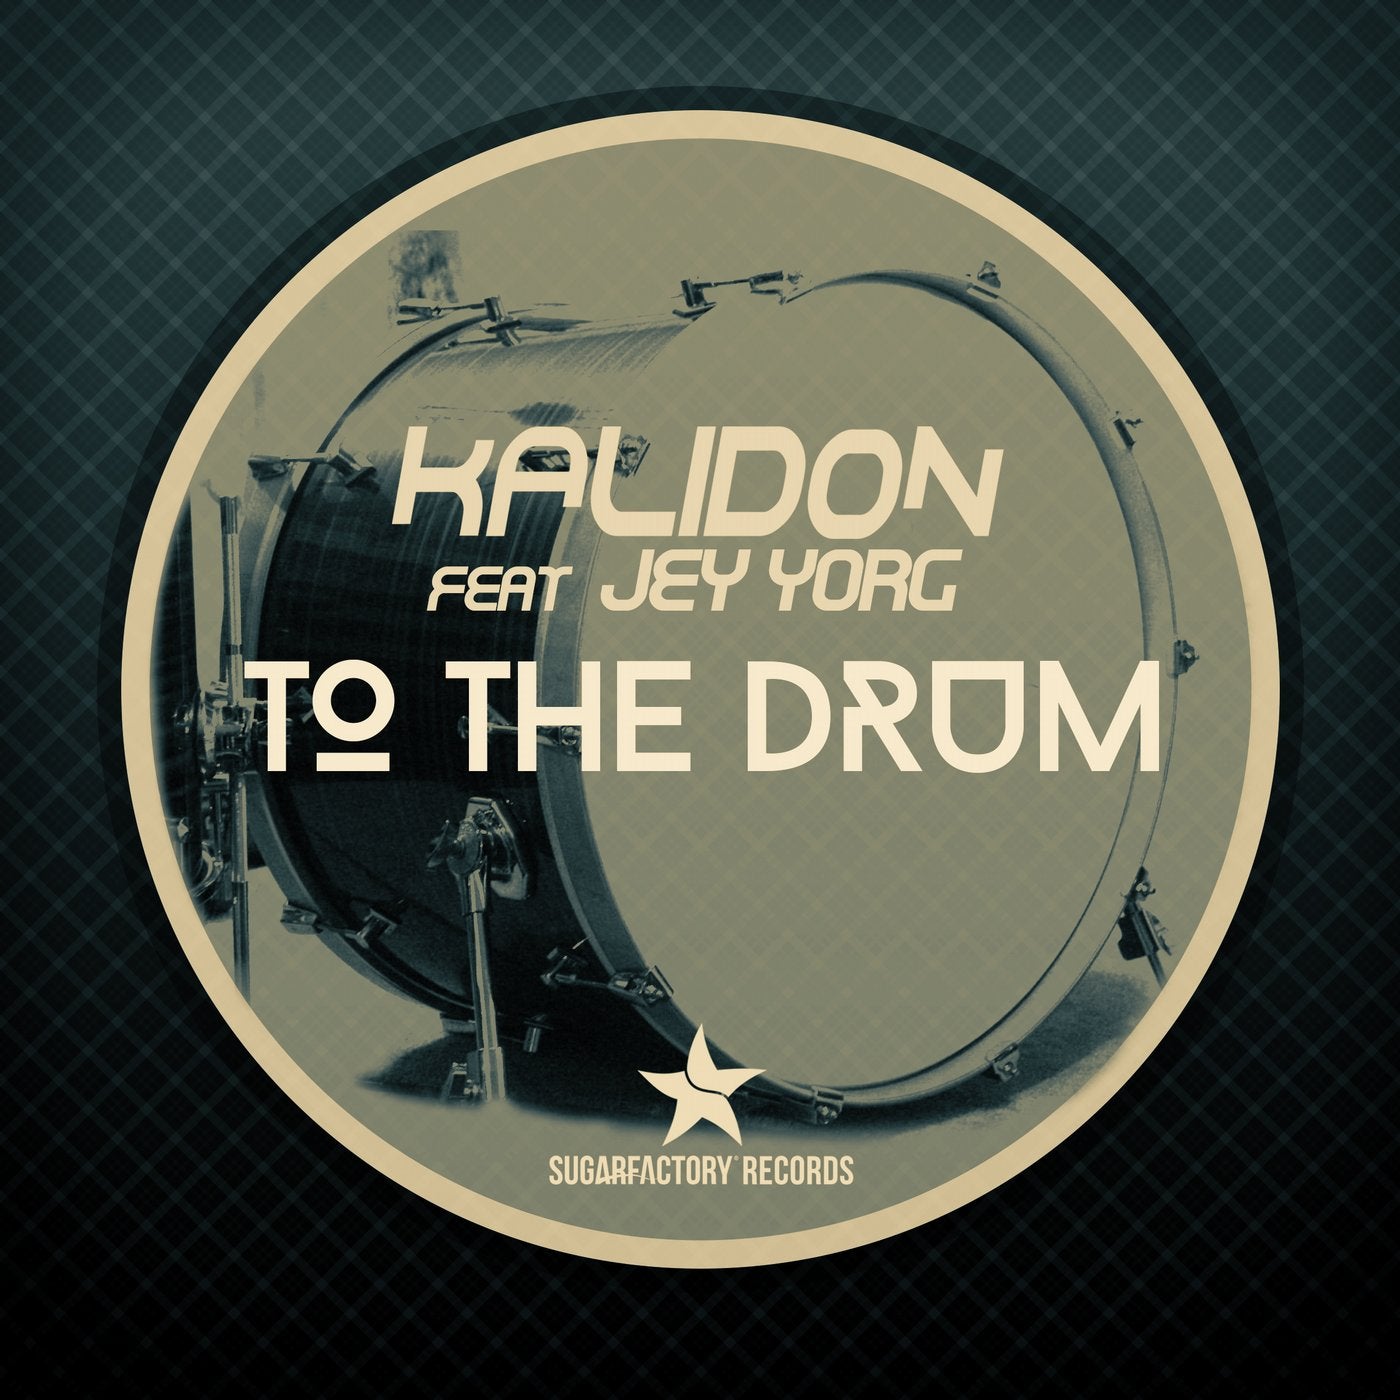 To the Drum